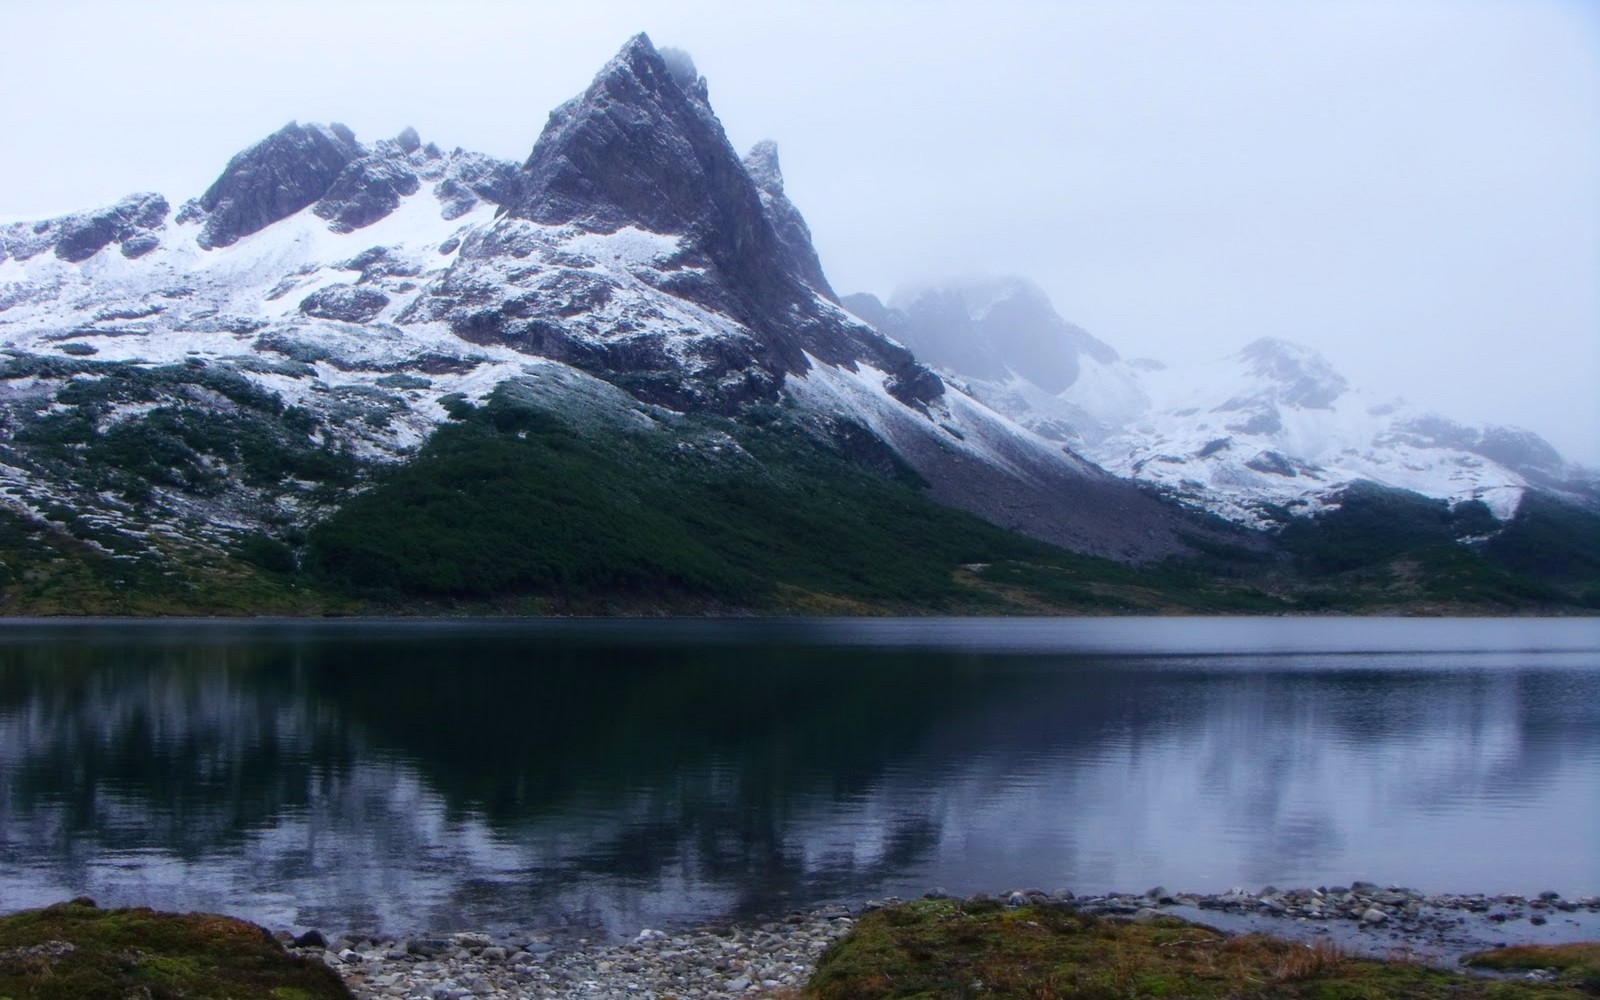 General 1600x1000 lake winter mountains Chile island mist forest snowy peak water landscape nature South America